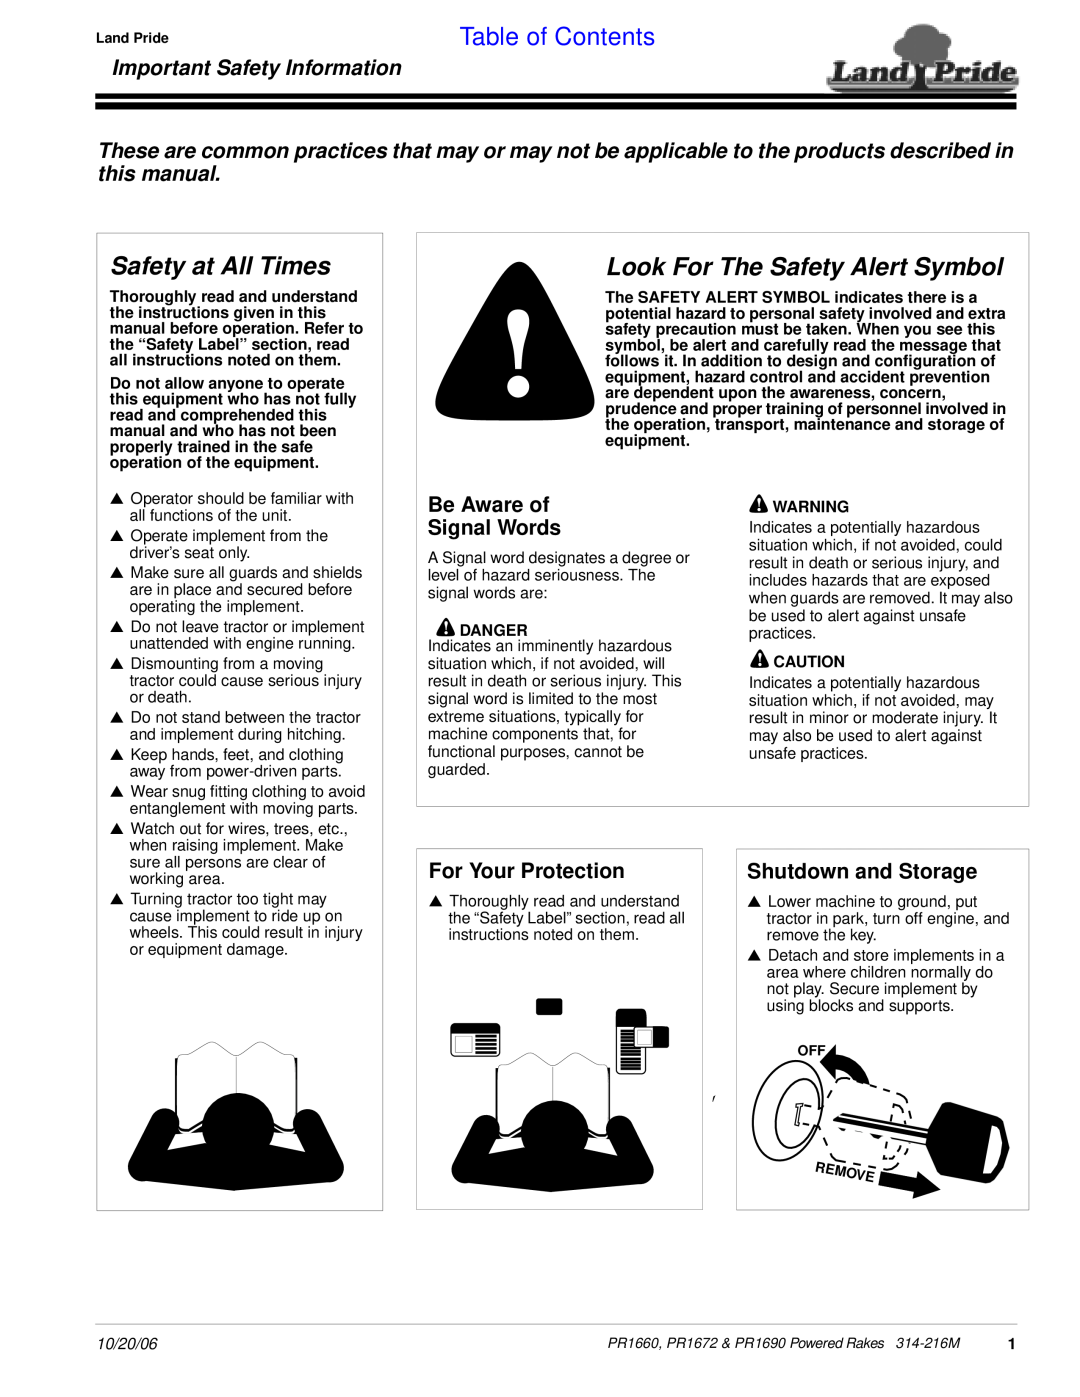 Land Pride PR1672 Safety at All Times, Look For The Safety Alert Symbol, Important Safety Information, Table of Contents 